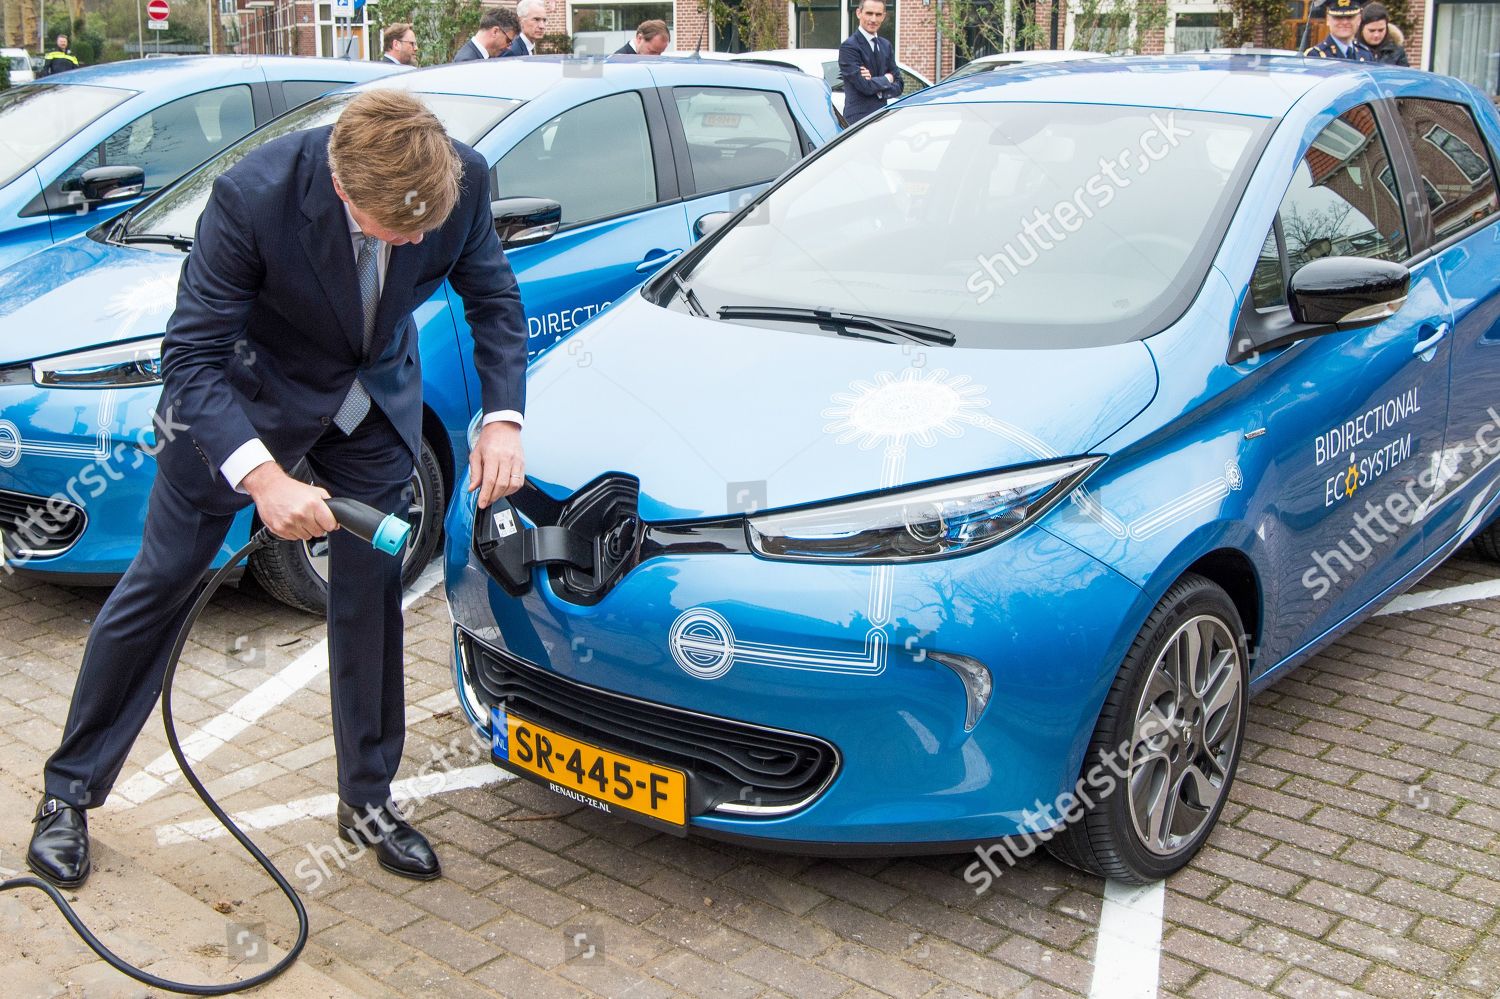 energy-and-mobility-system-launch-utrecht-netherlands-shutterstock-editorial-10163017n.jpg